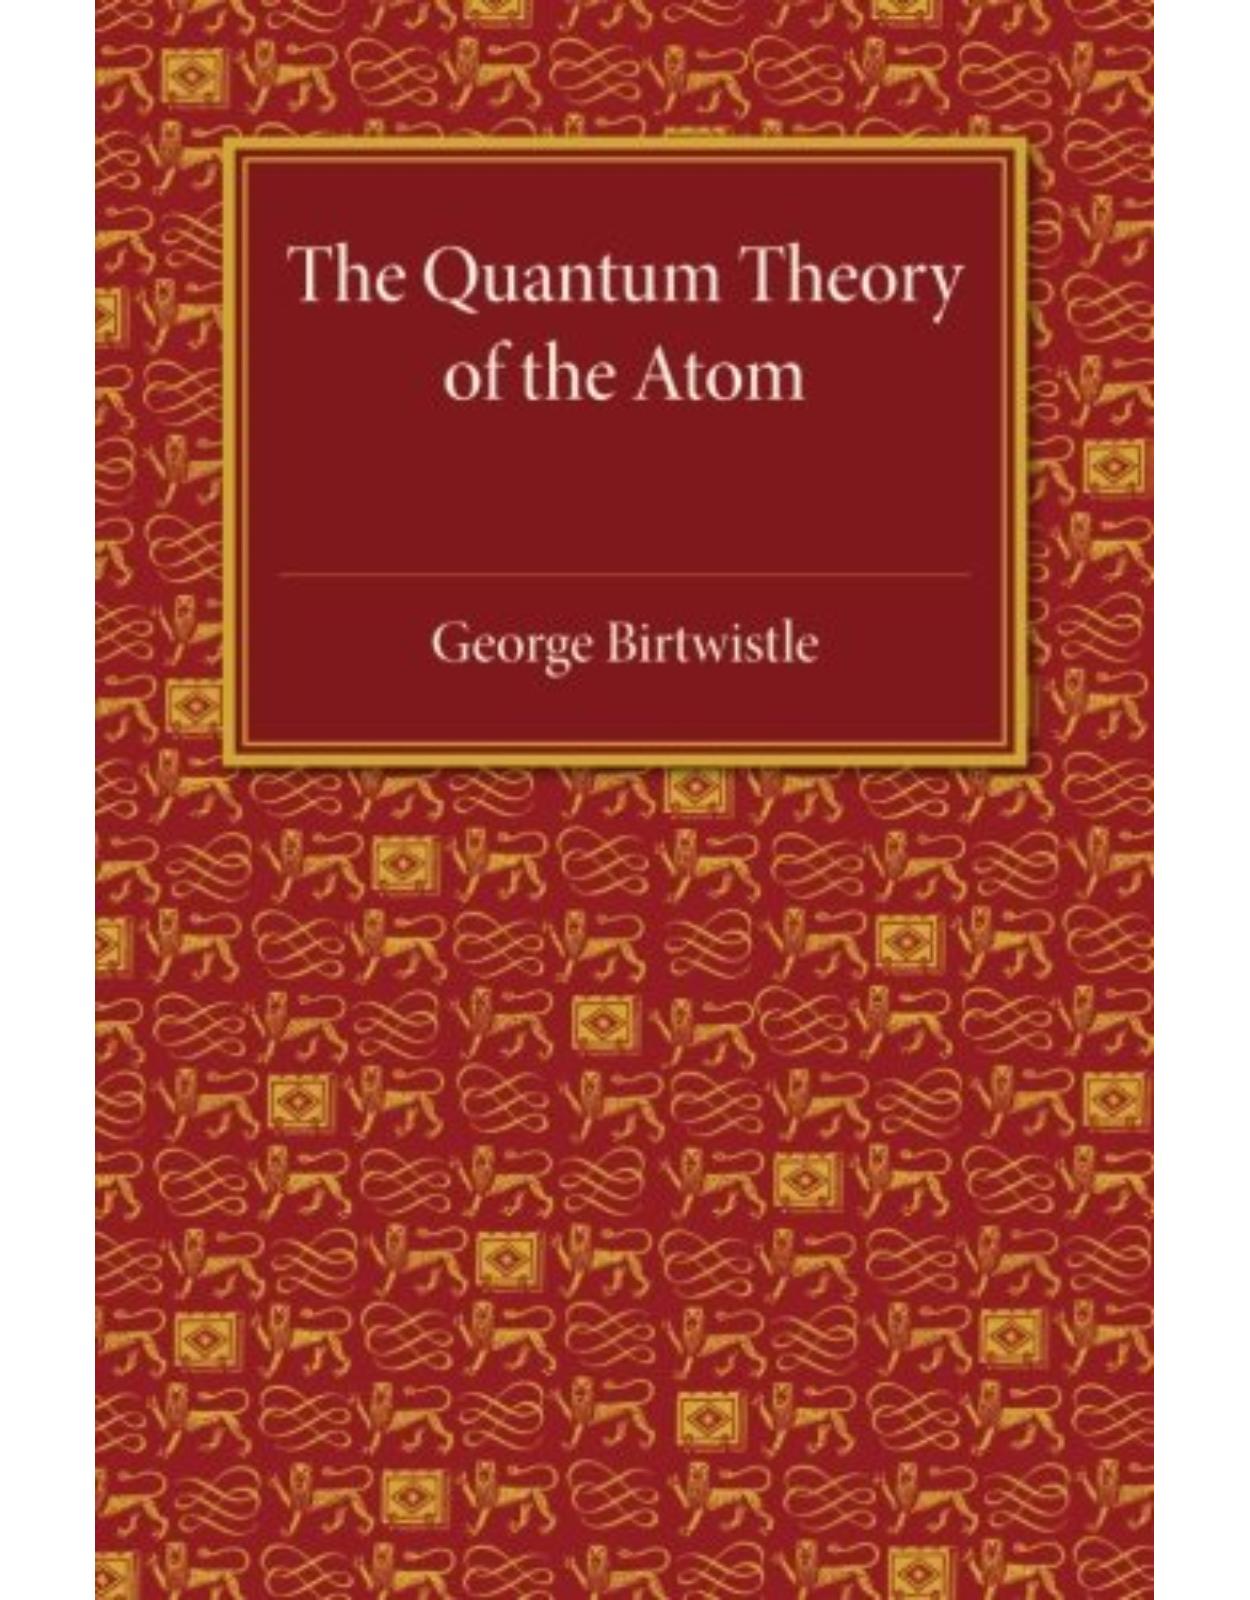 The Quantum Theory of the Atom